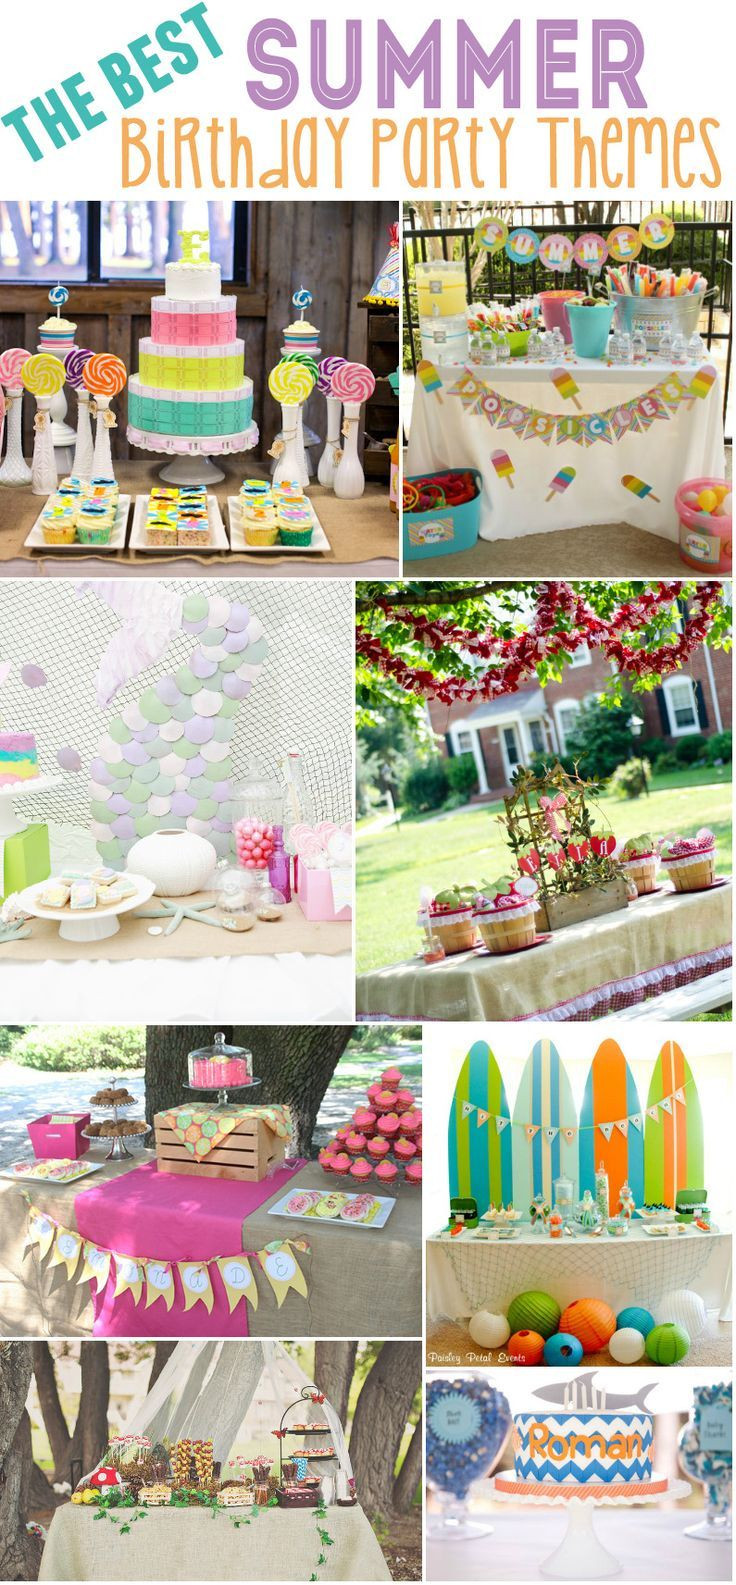 15 Year Old Birthday Party Ideas Summer
 15 Best Summer Birthday Party Themes